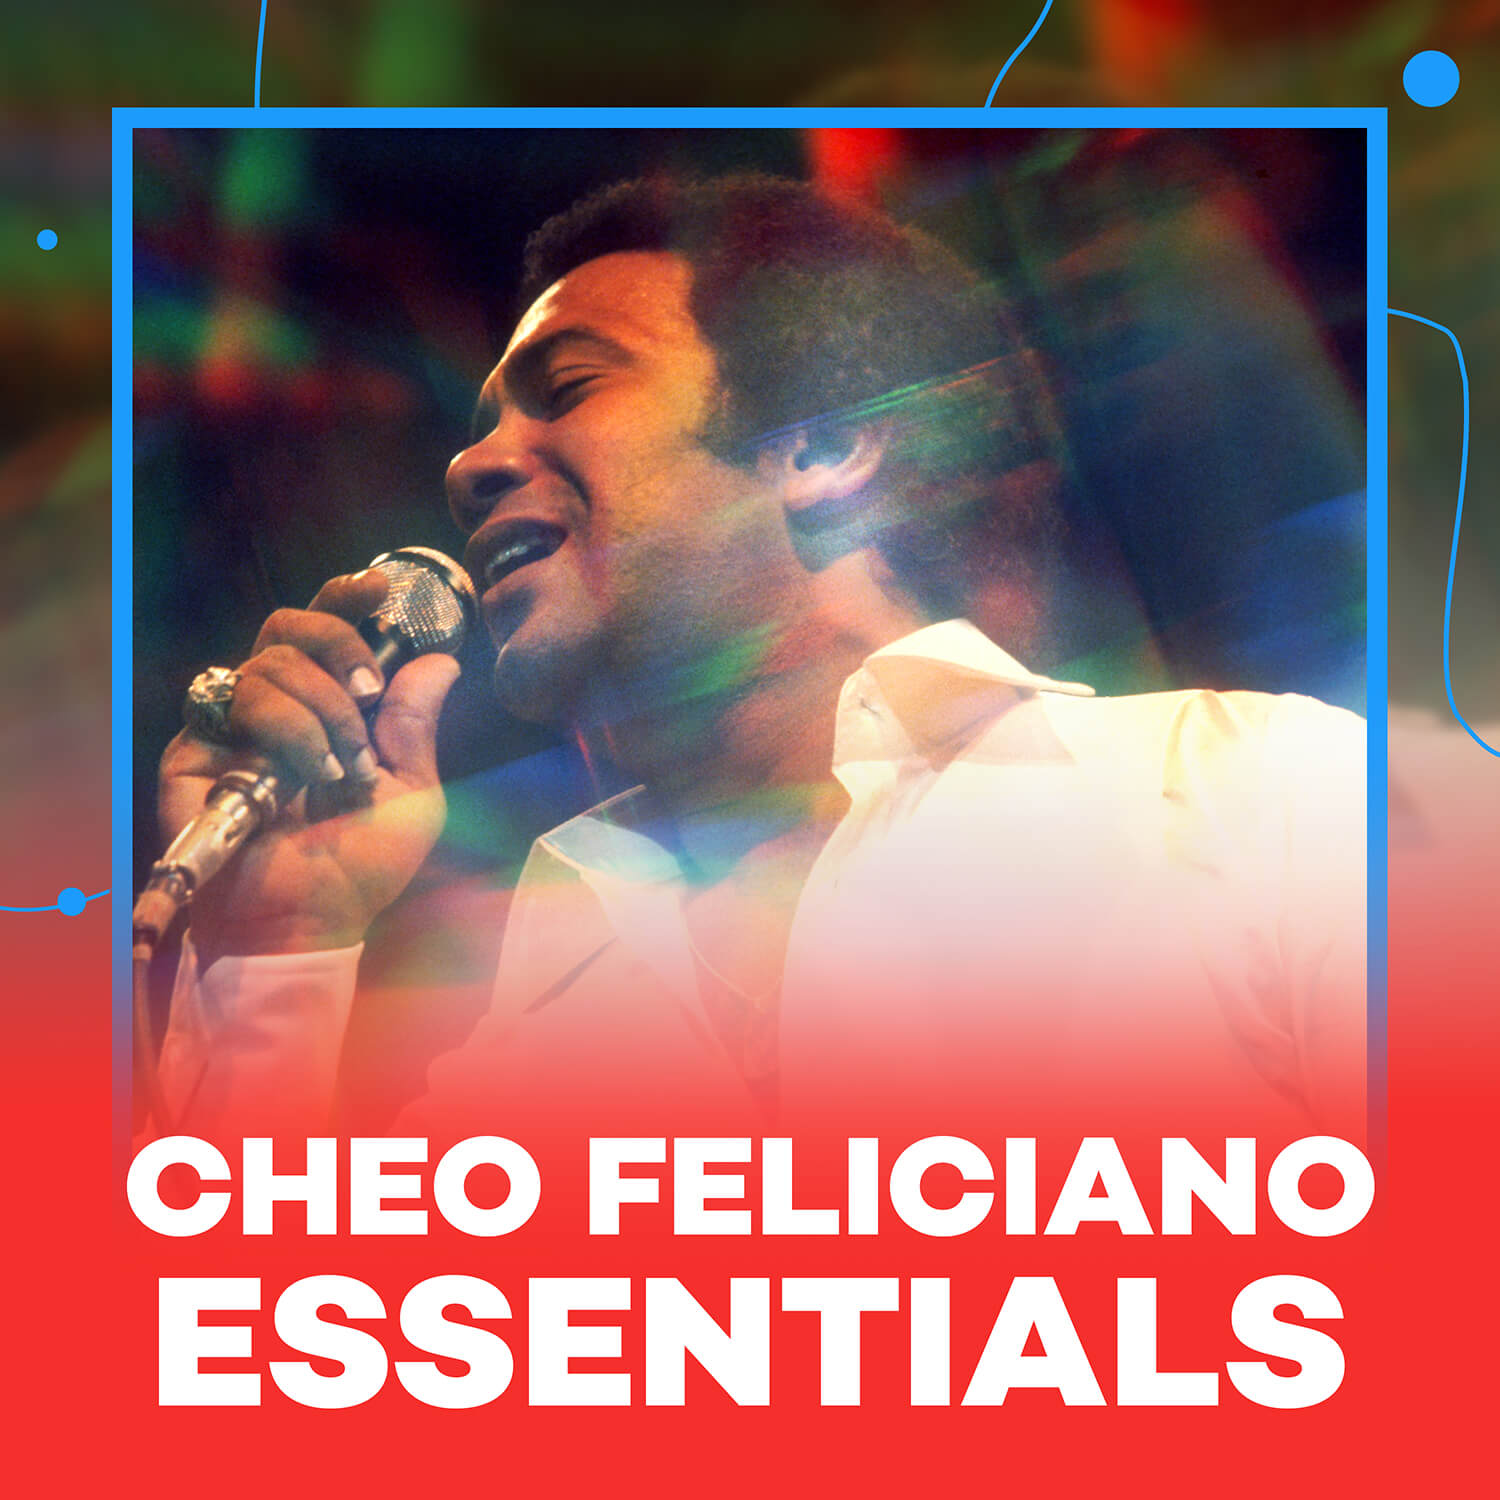 Featured image for “Cheo Feliciano”